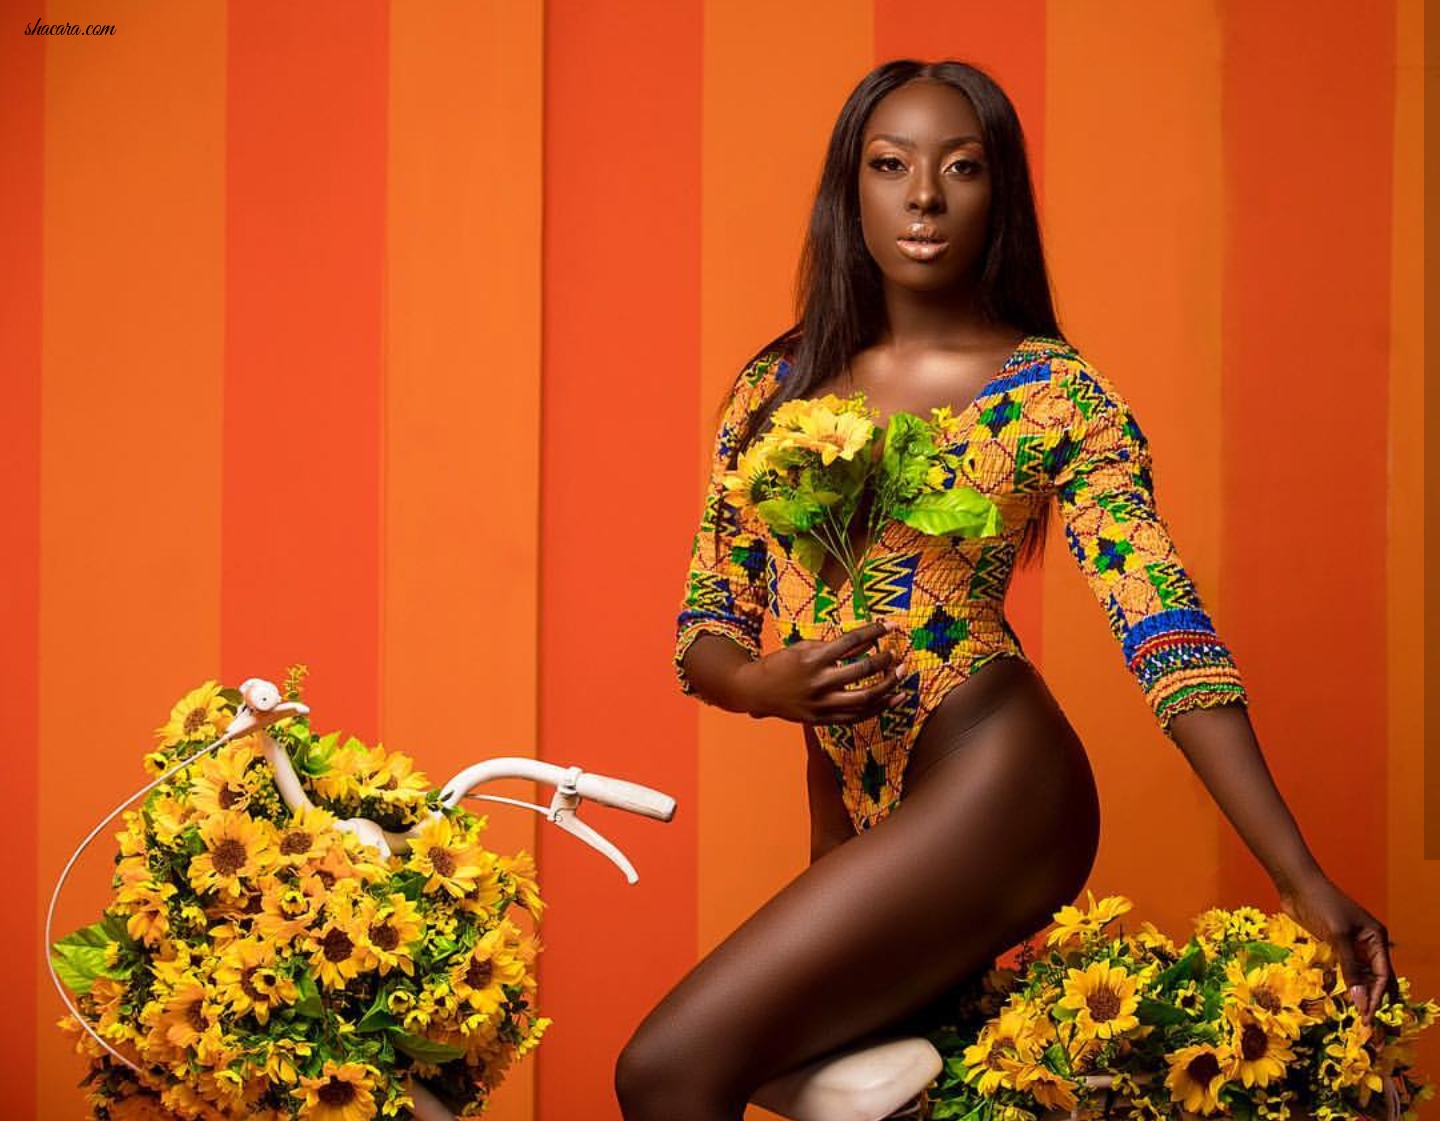 Ghanaian Model Gifty B Is Looking All Sorts Of Yummy In Haute Campaign Shoot By TwinsDontBeg